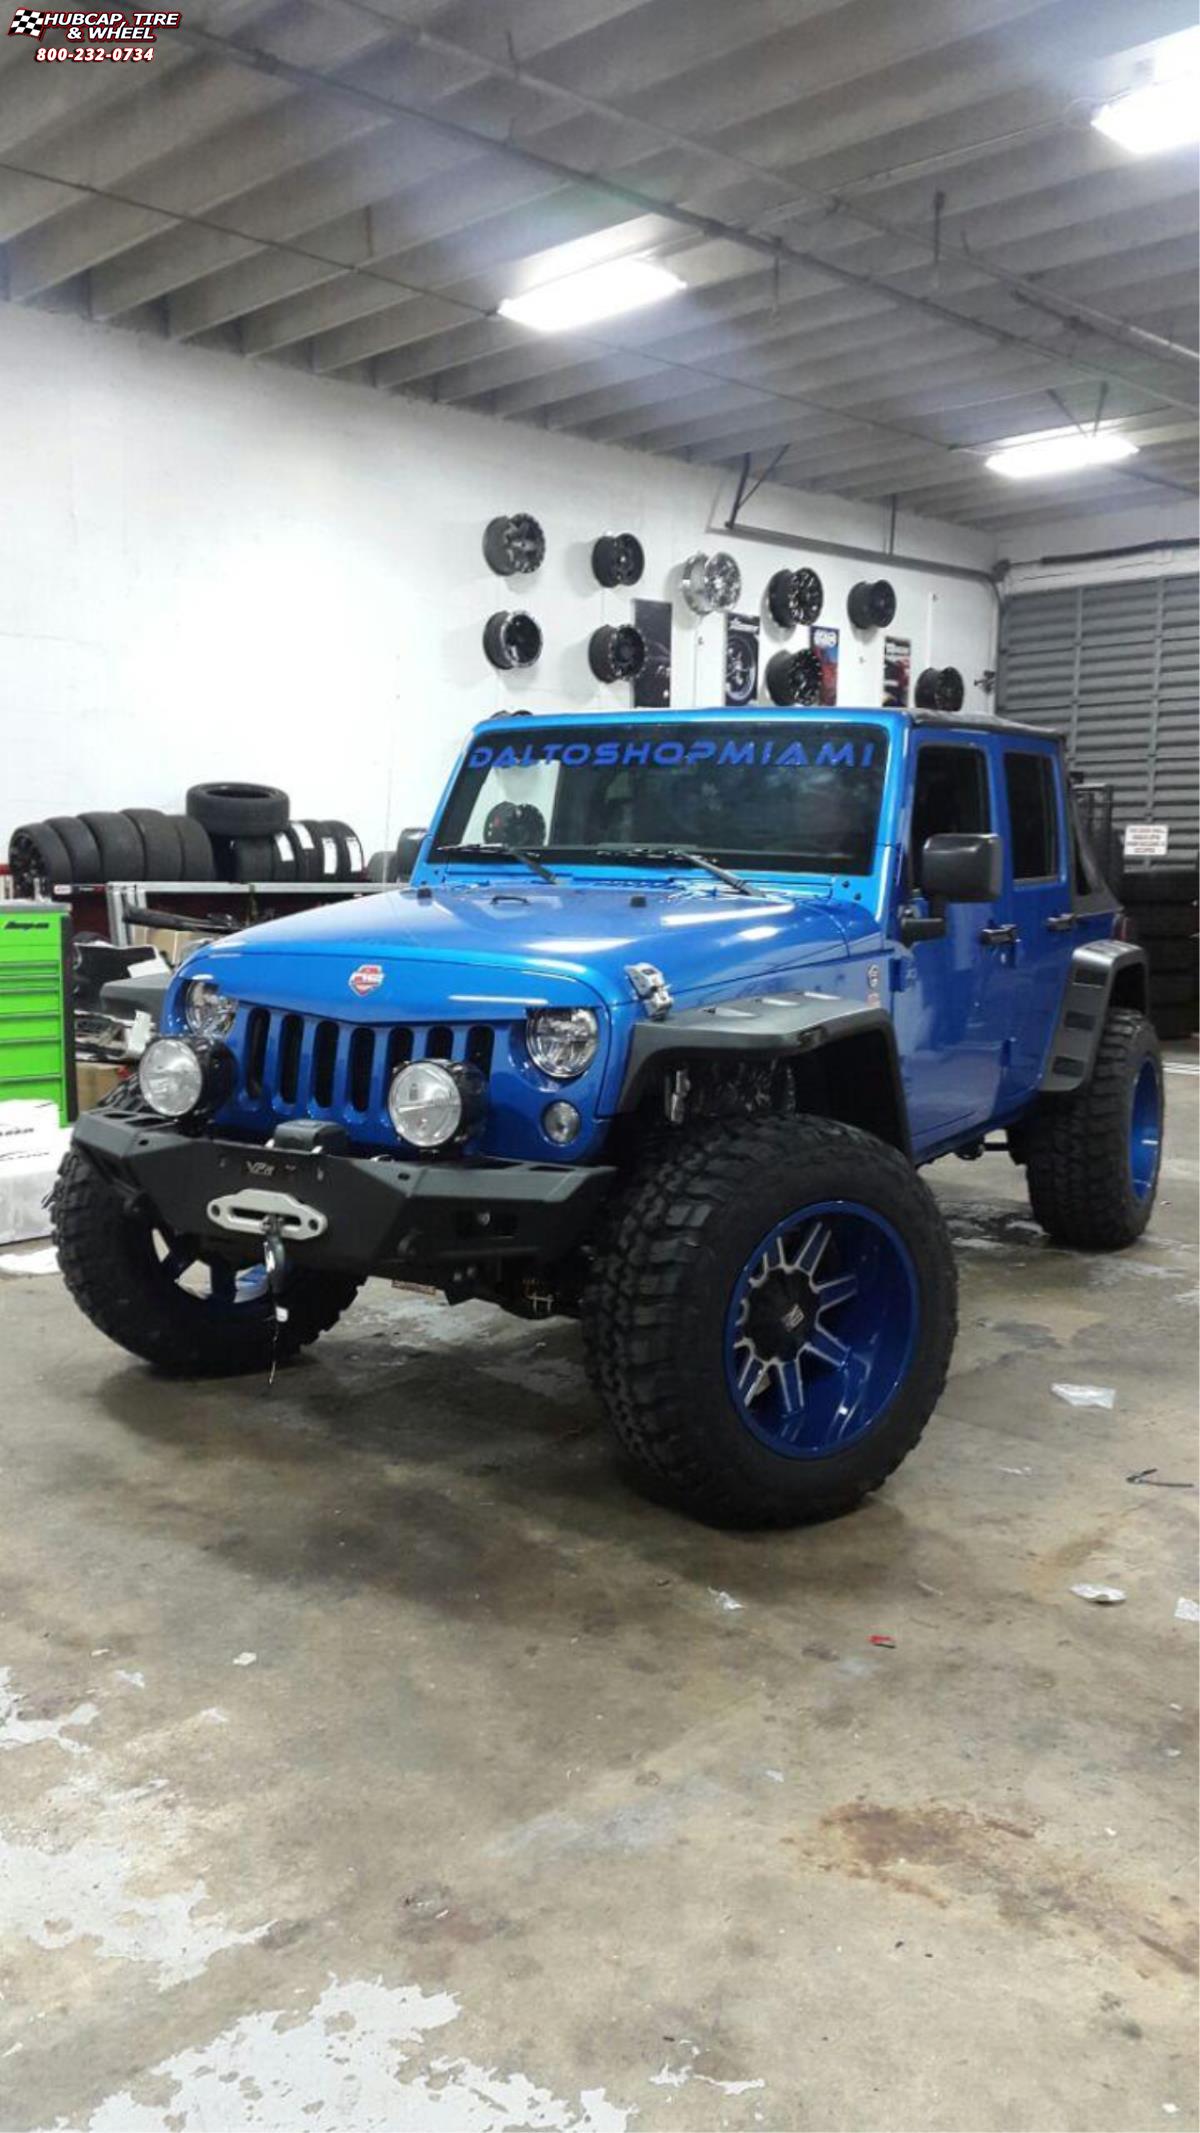 vehicle gallery/2014 jeep wrangler xd series xd823 trap 20x12  Blue and Machined wheels and rims